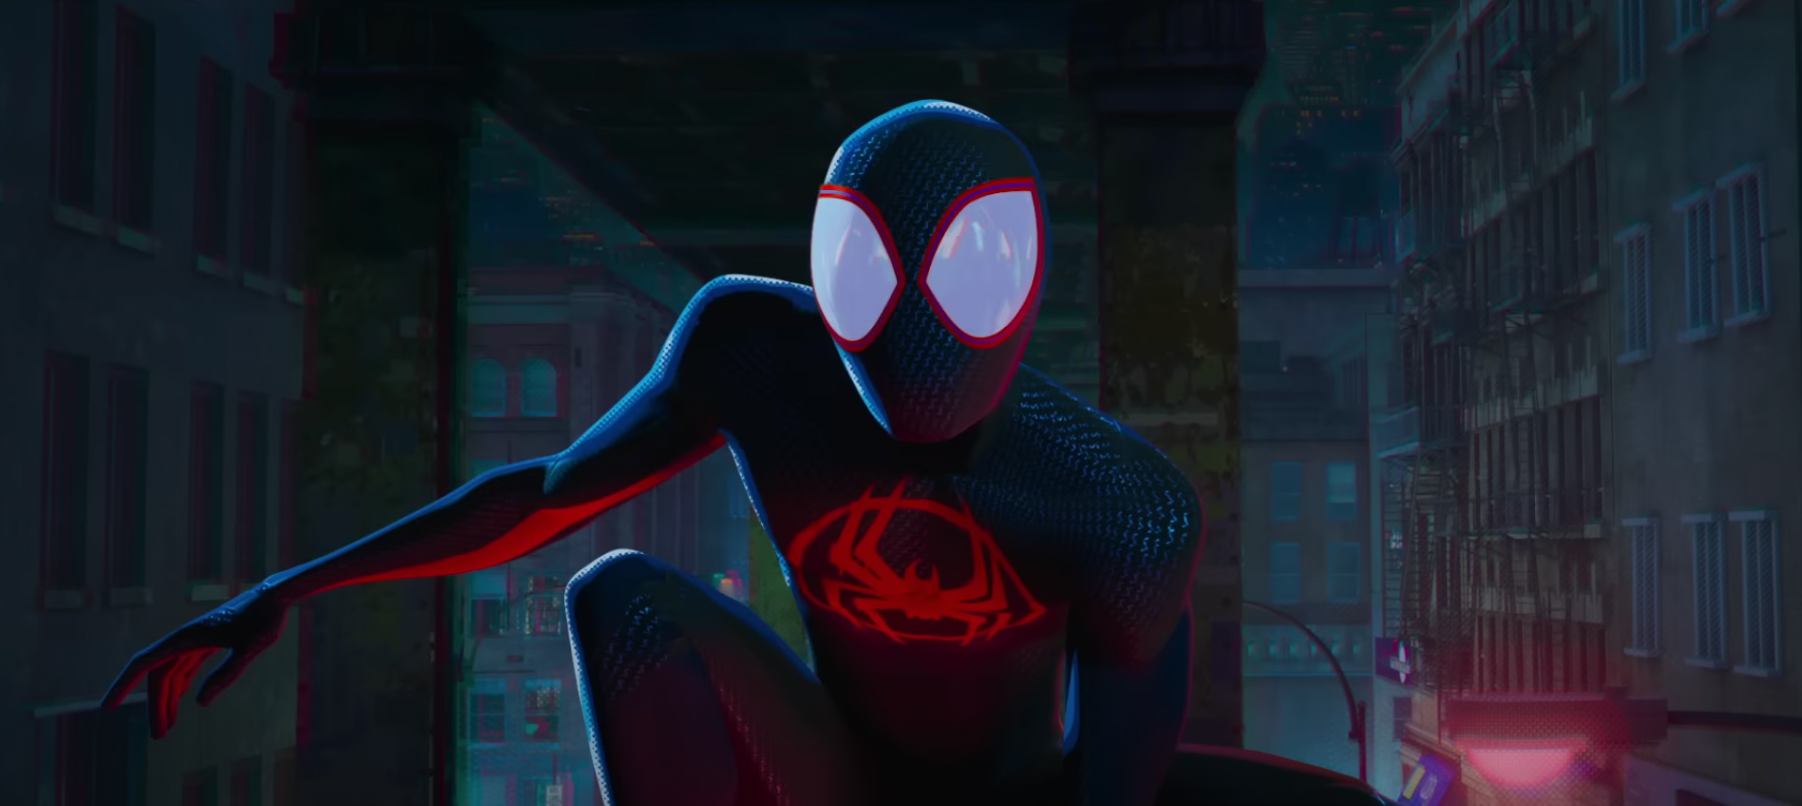 Spider-Man Trailer Teases the End of the Spider-Verse